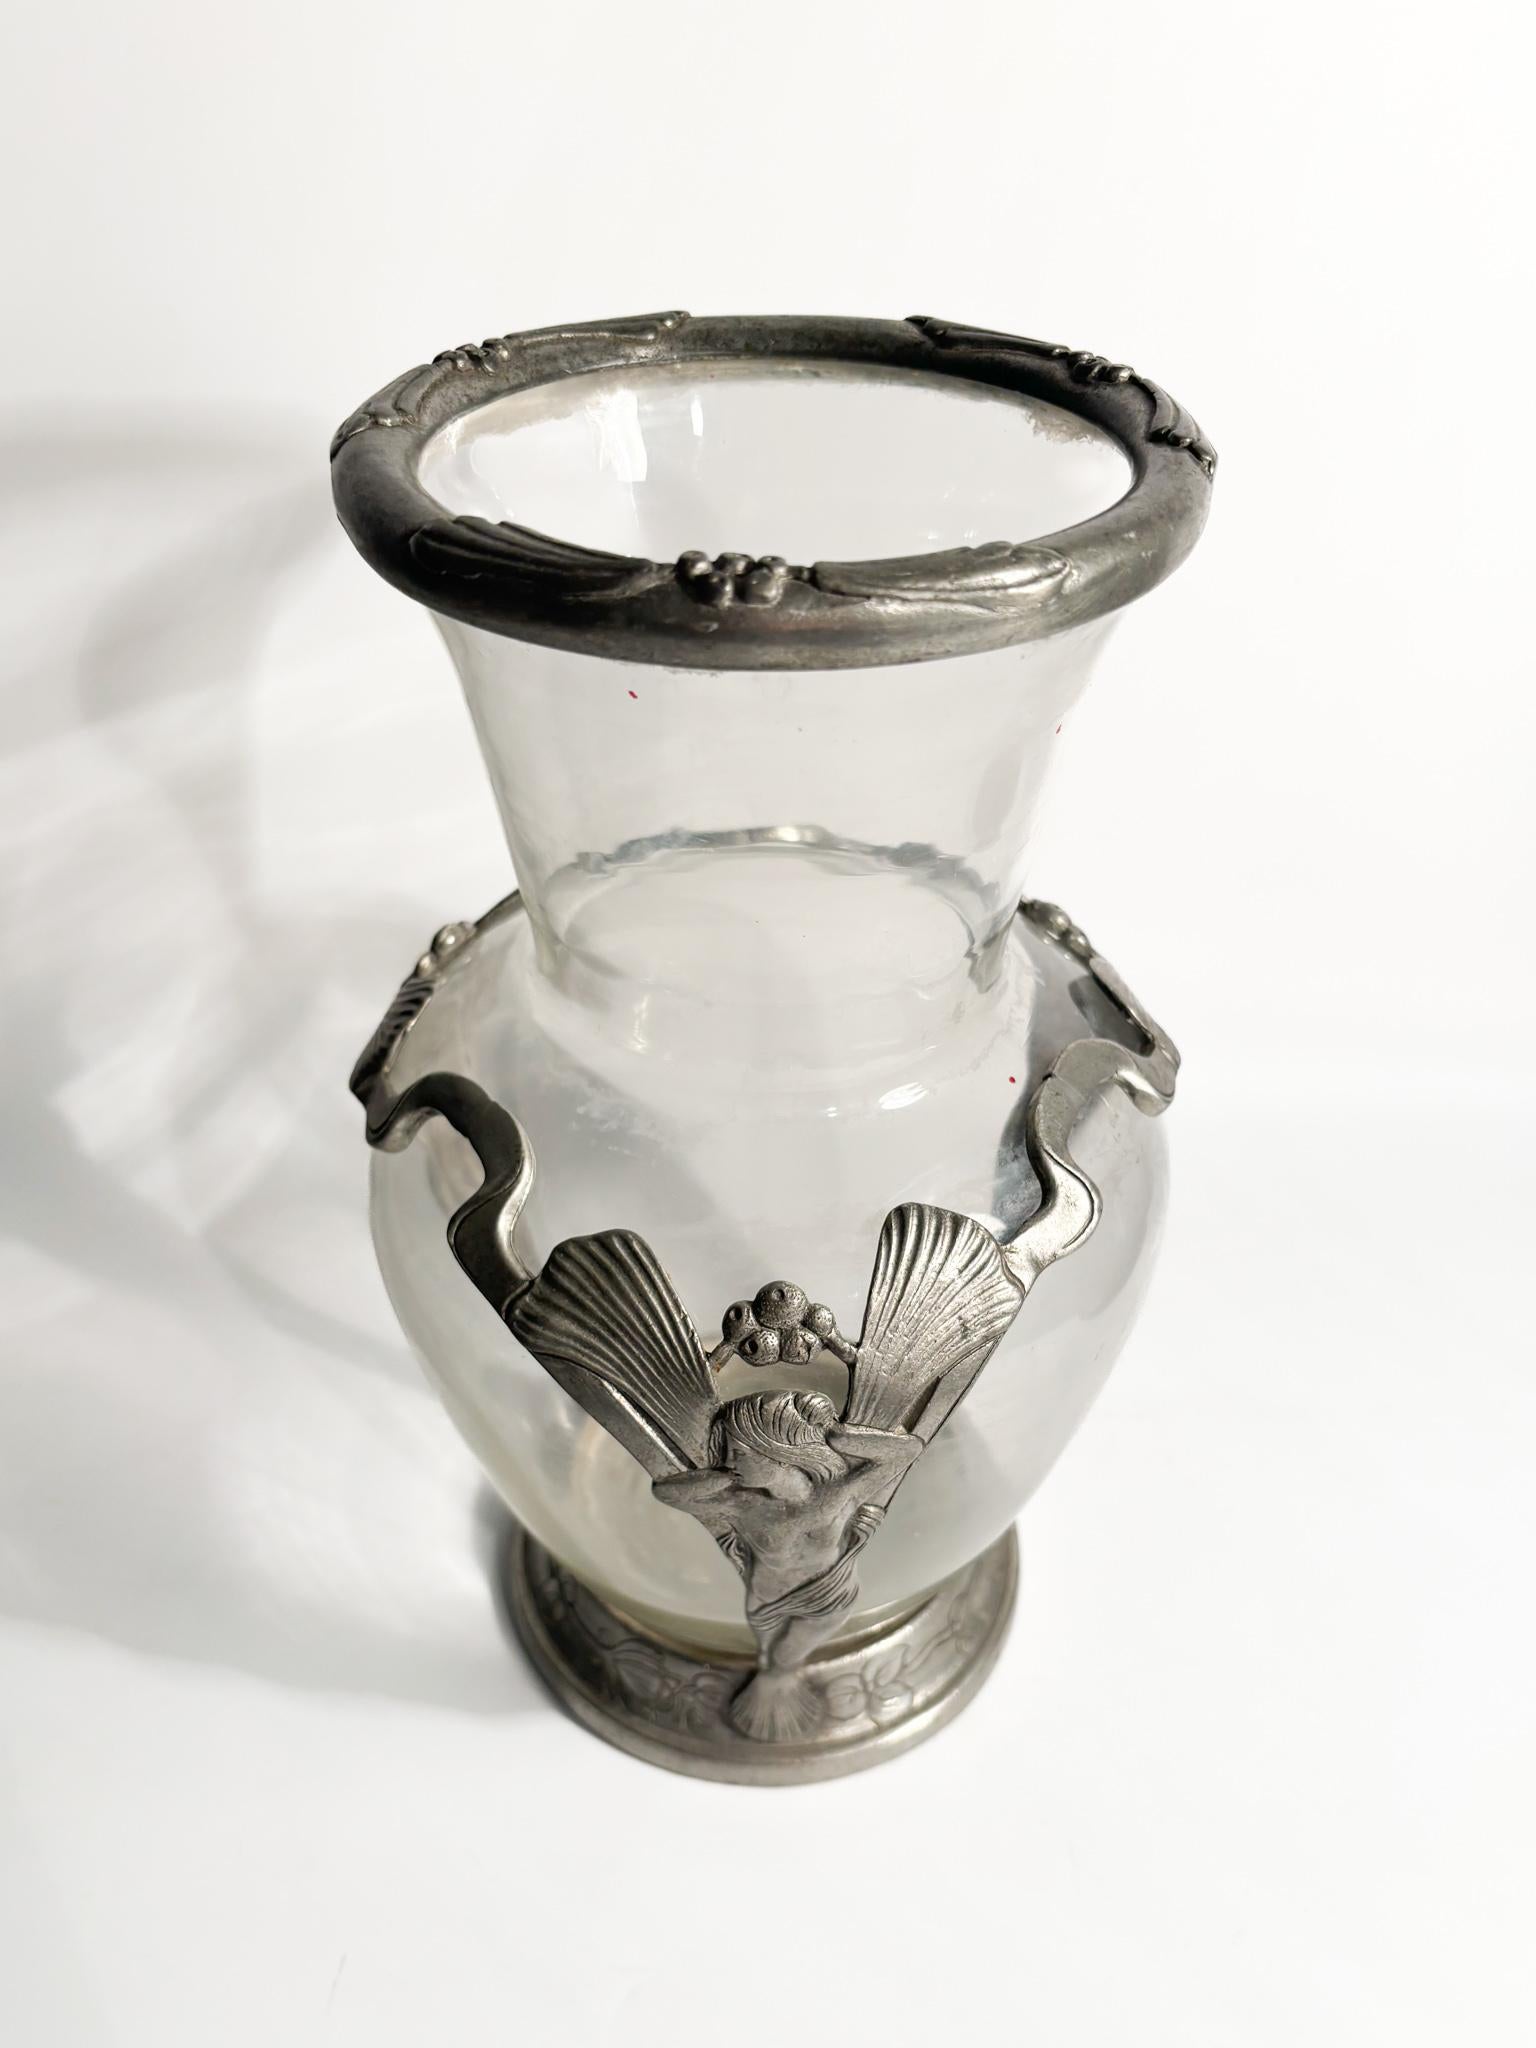 Italian Art Nouveau Vase in and Sculpted Pewter from the Early Twentieth Century For Sale